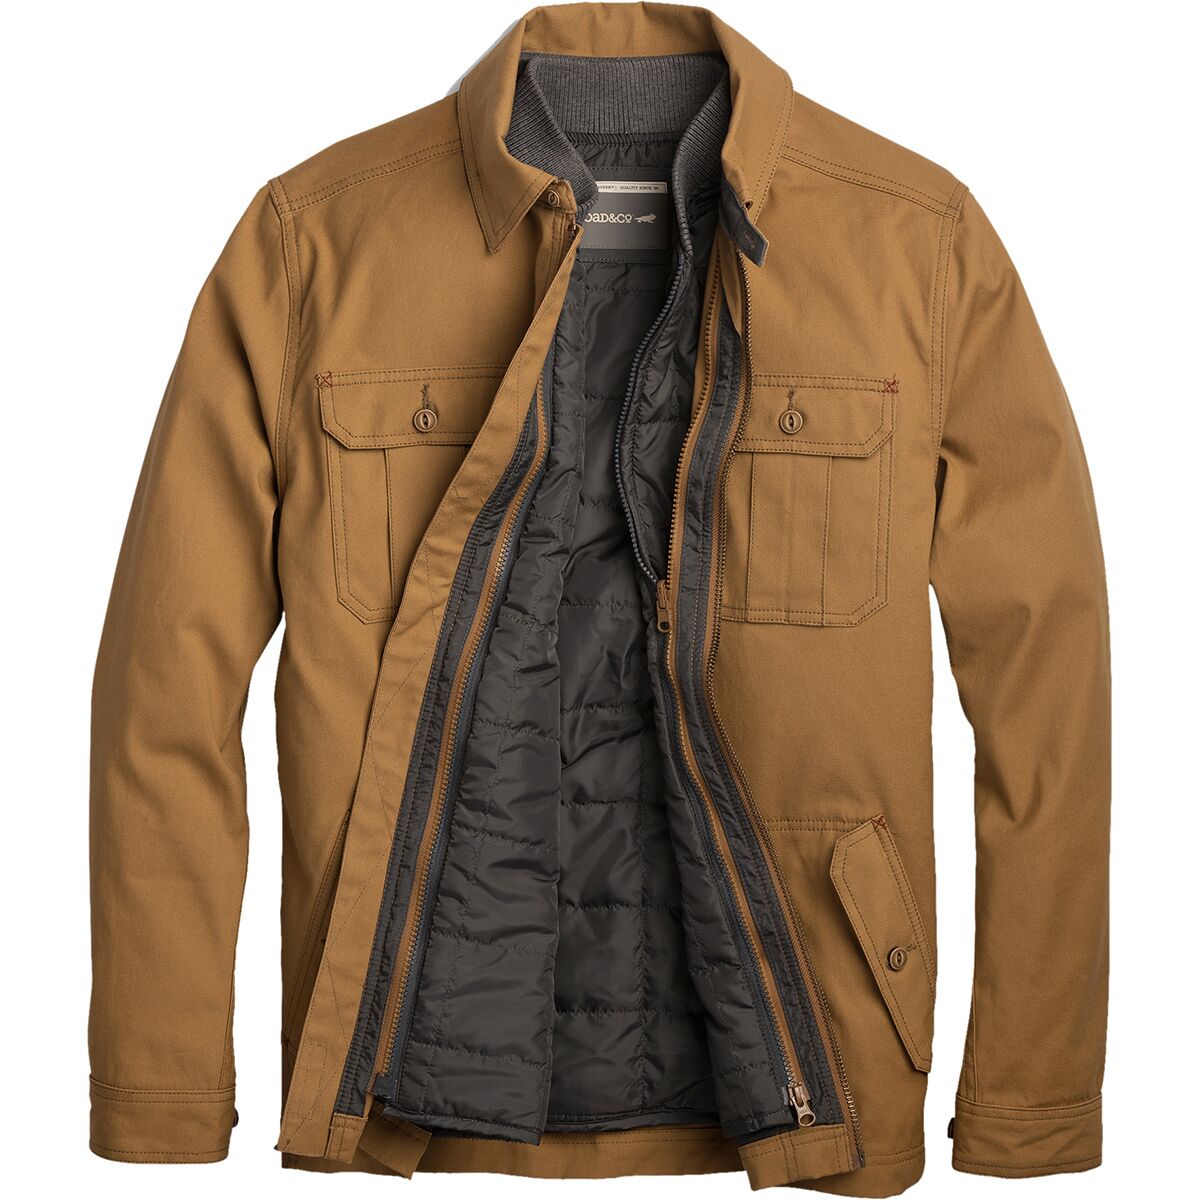 Toad&Co Cool Hand Jacket - Men's - Clothing